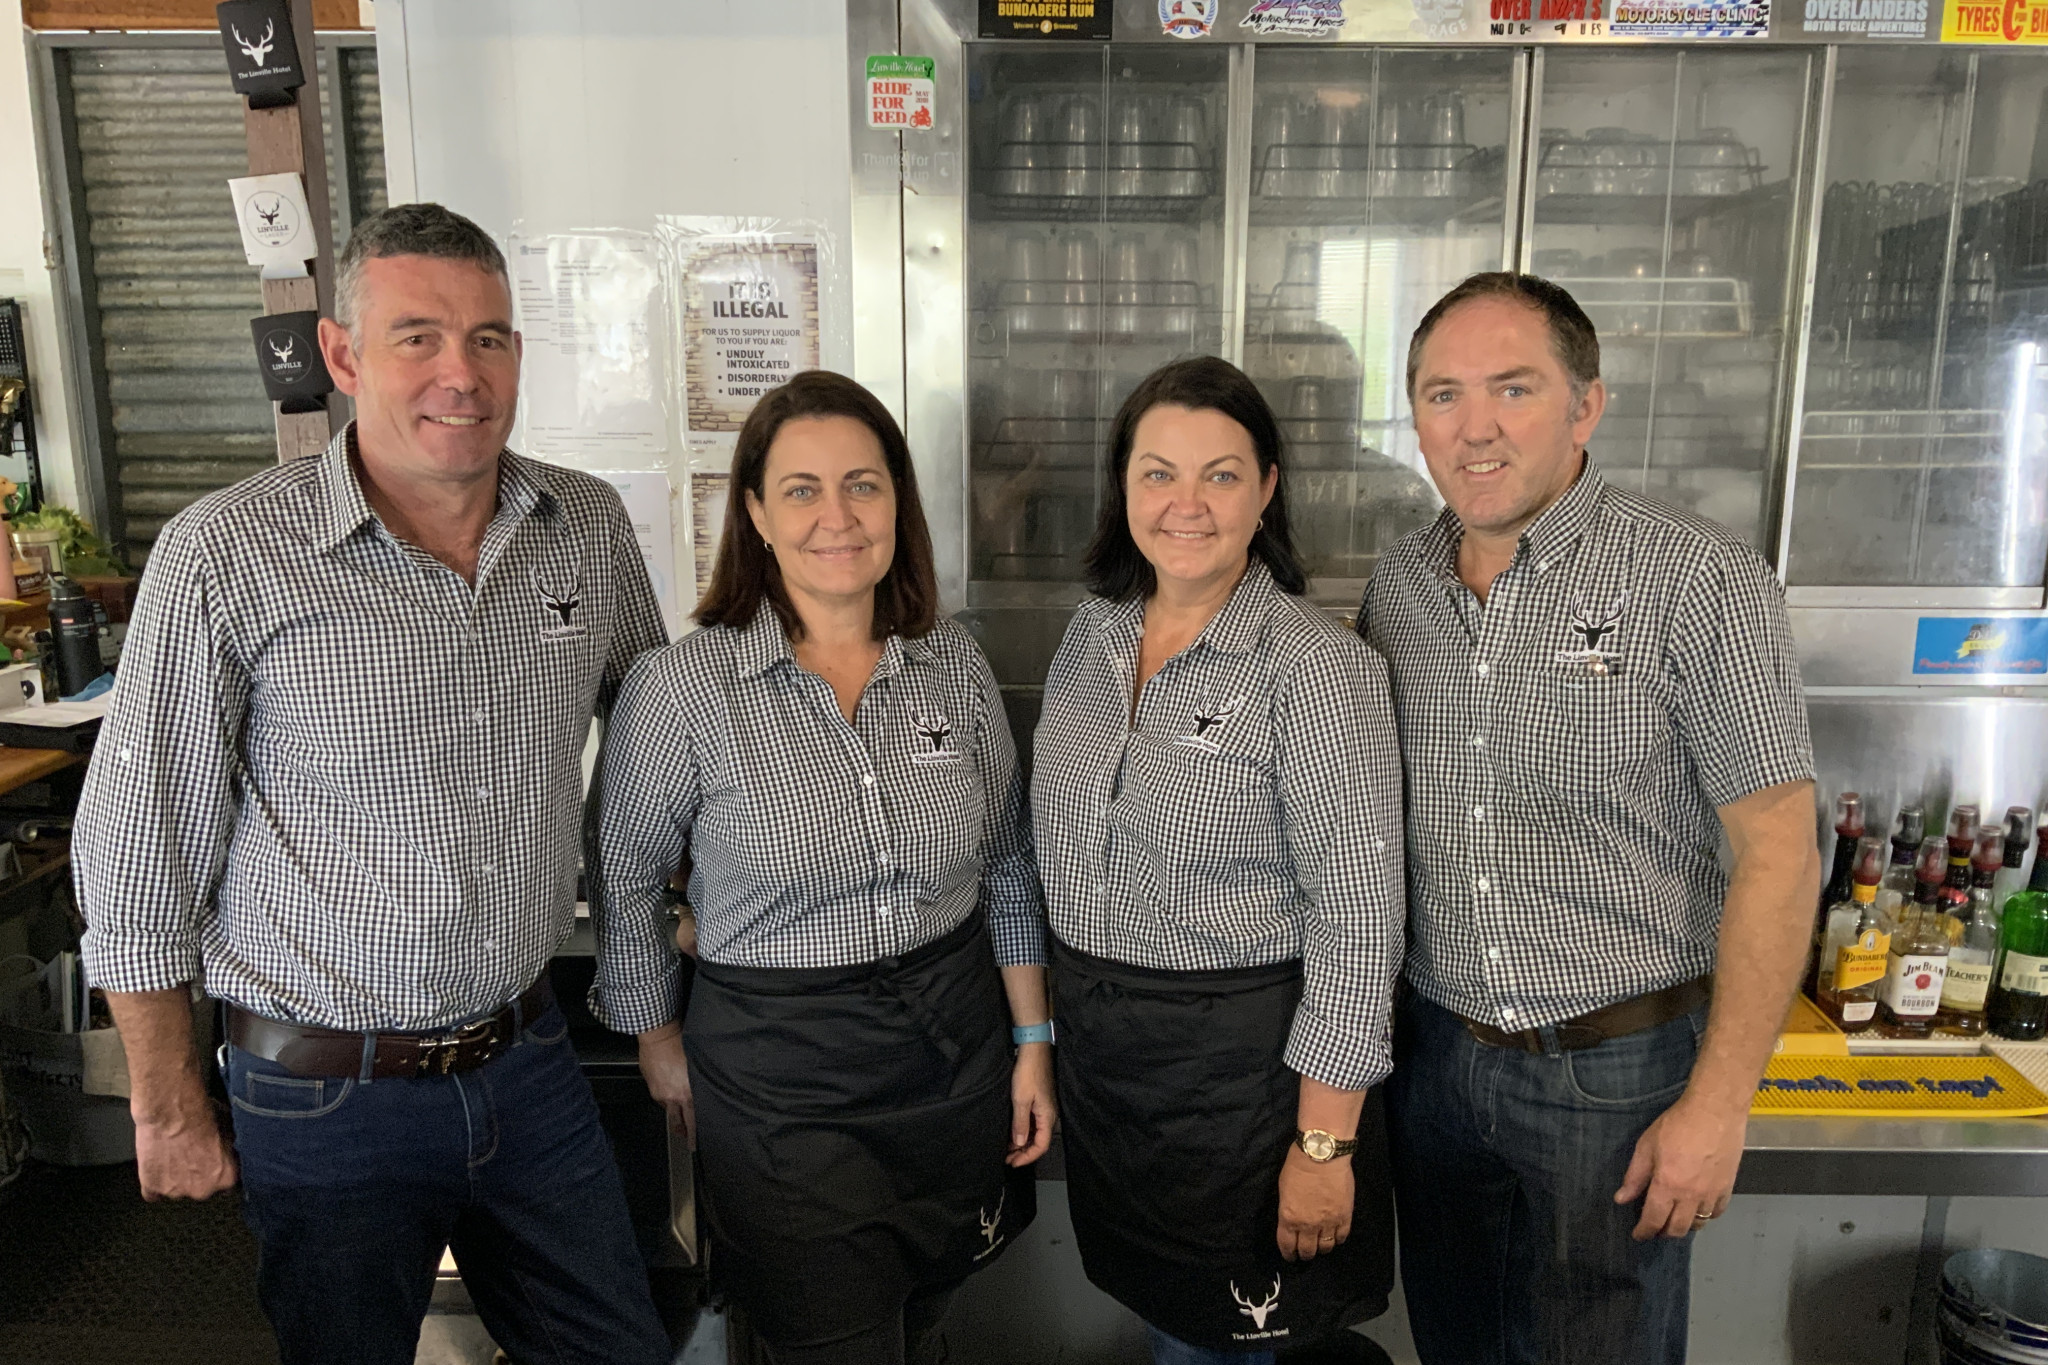 Evan and Tanya Grimward, and Tracey and Cathal Diver are ready for busy times at the Linville Hotel in the near future.